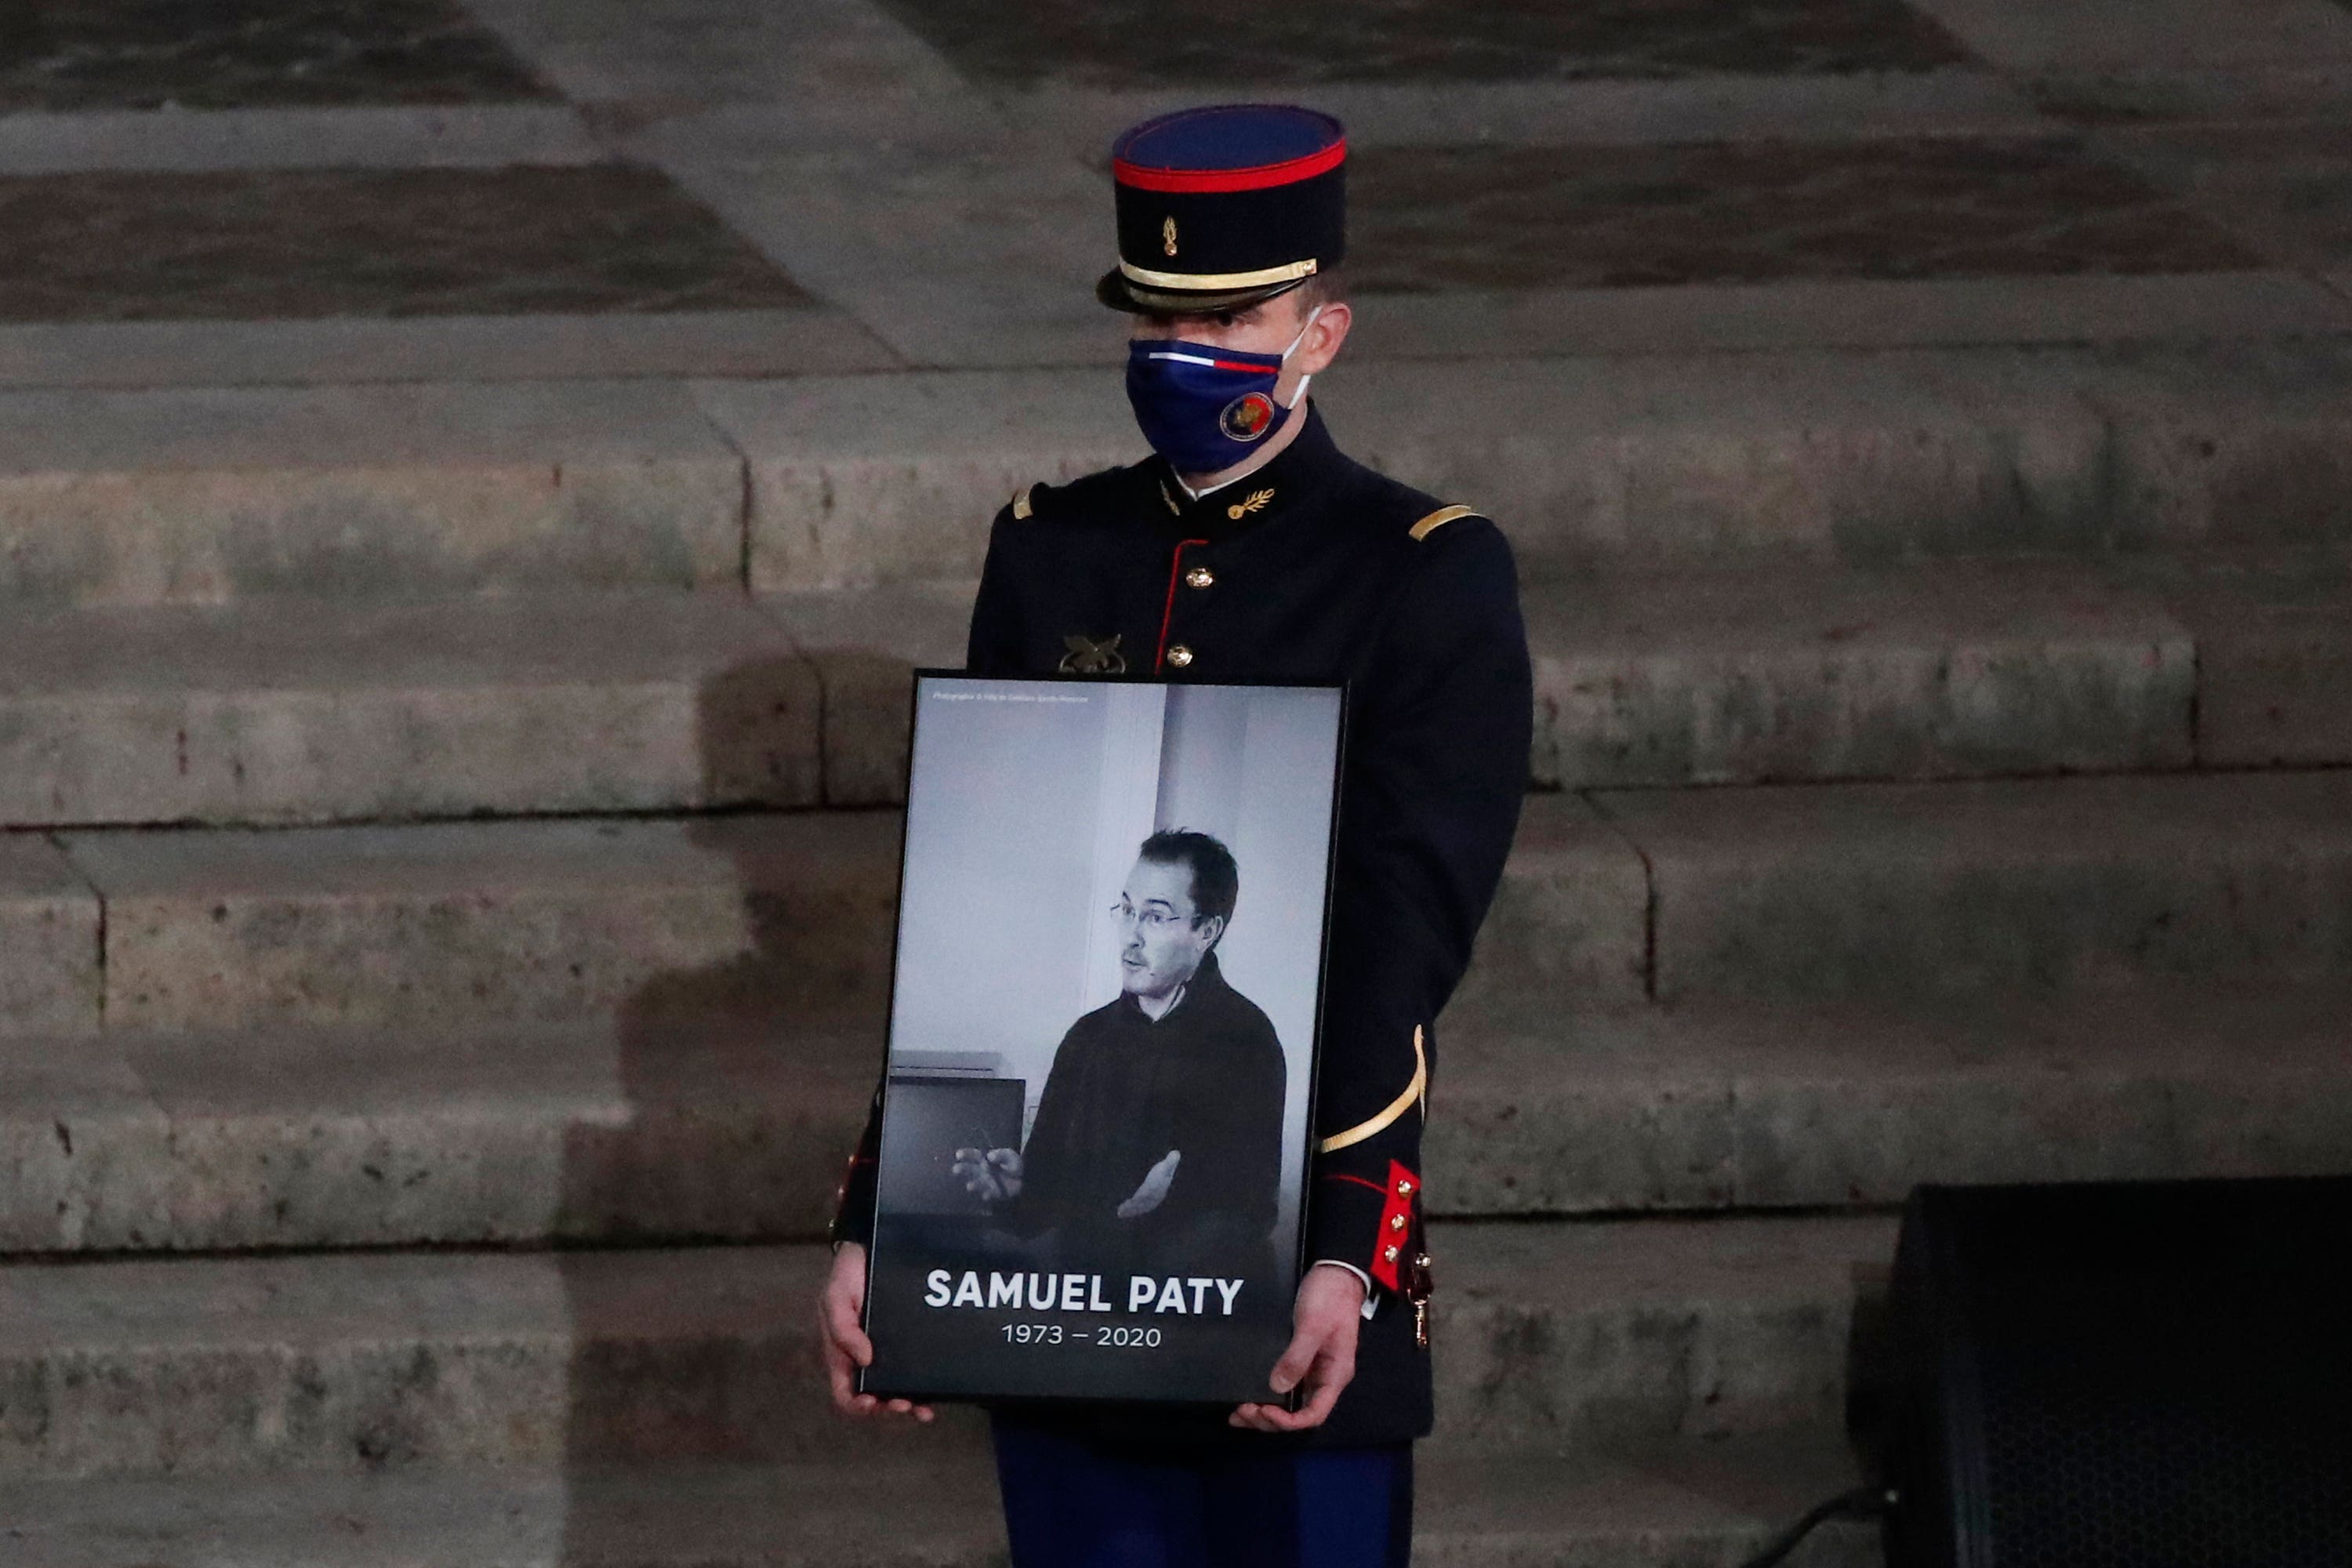 A Republican Guard holds a portrait of Samuel Paty in the courtyard of the Sorbonne university during a national memorial event (Francois Mori, Pool/AP) 